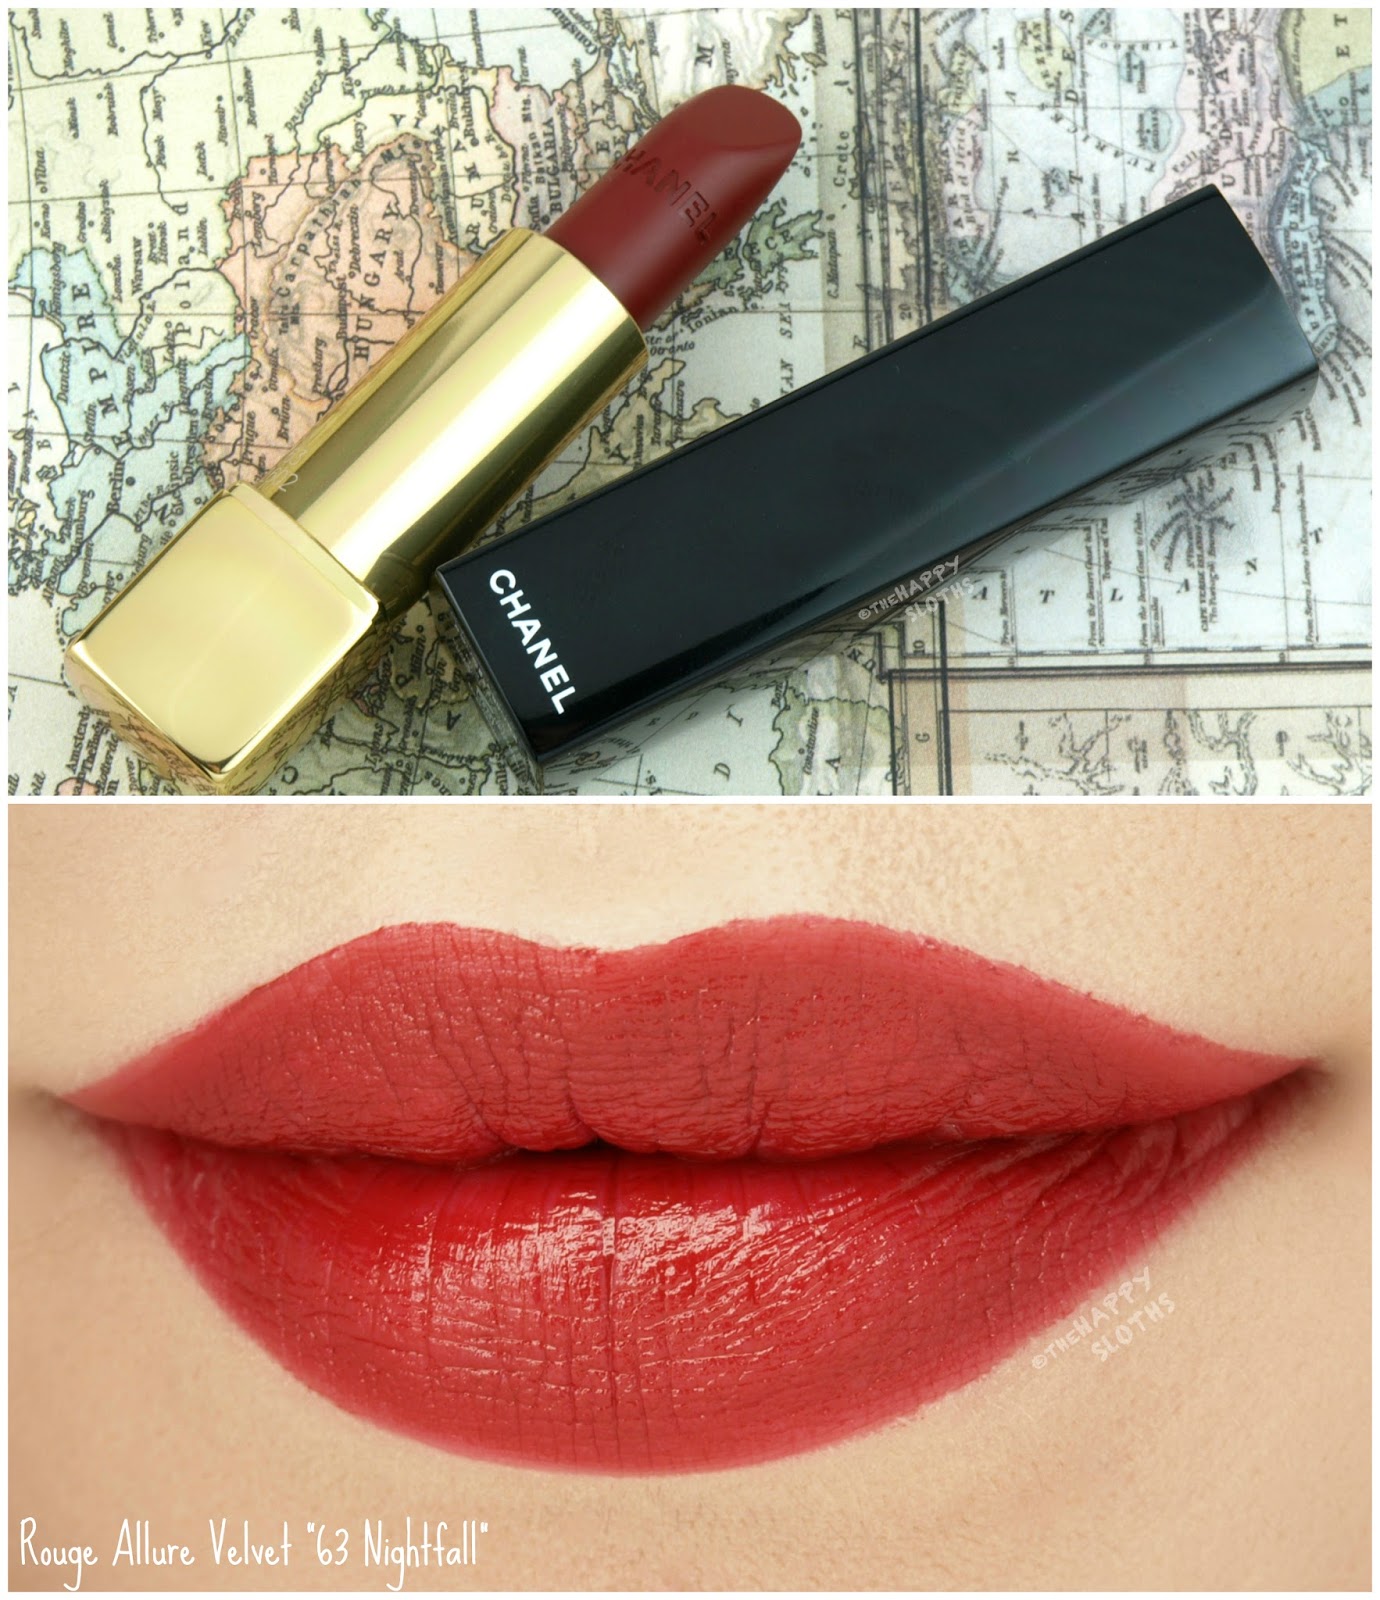 Chanel Travel Diary Fall Collection Rouge Allure Intense Lipstick